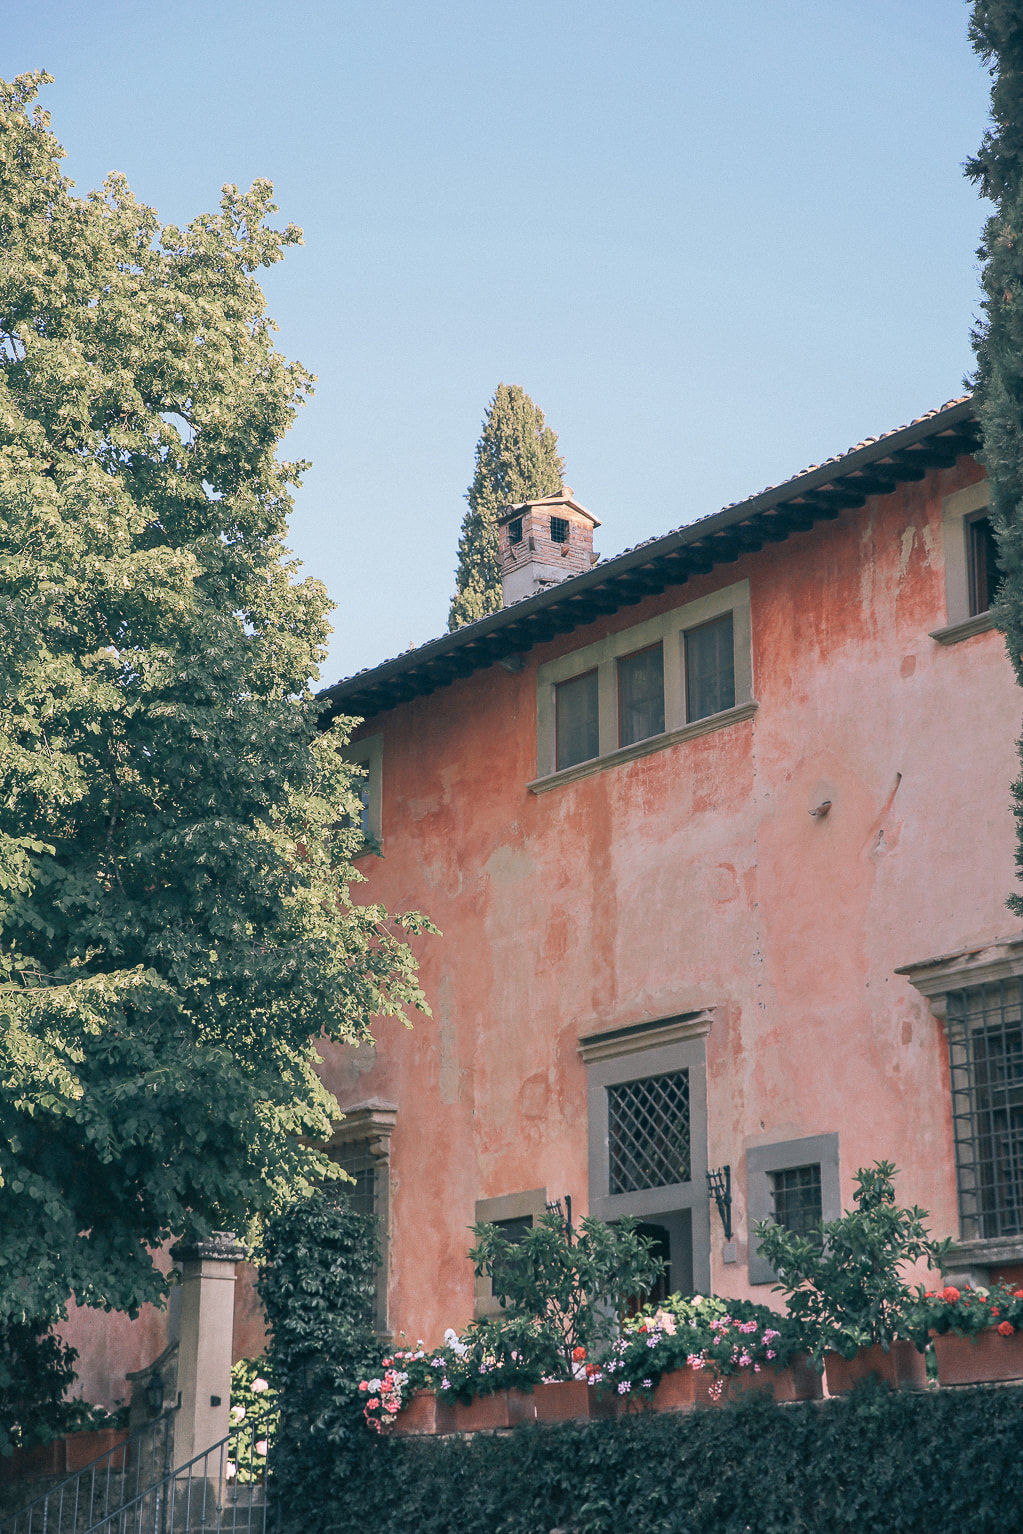 Vignamaggio - Greve in Chianti, Tuscany by The Belle Blog